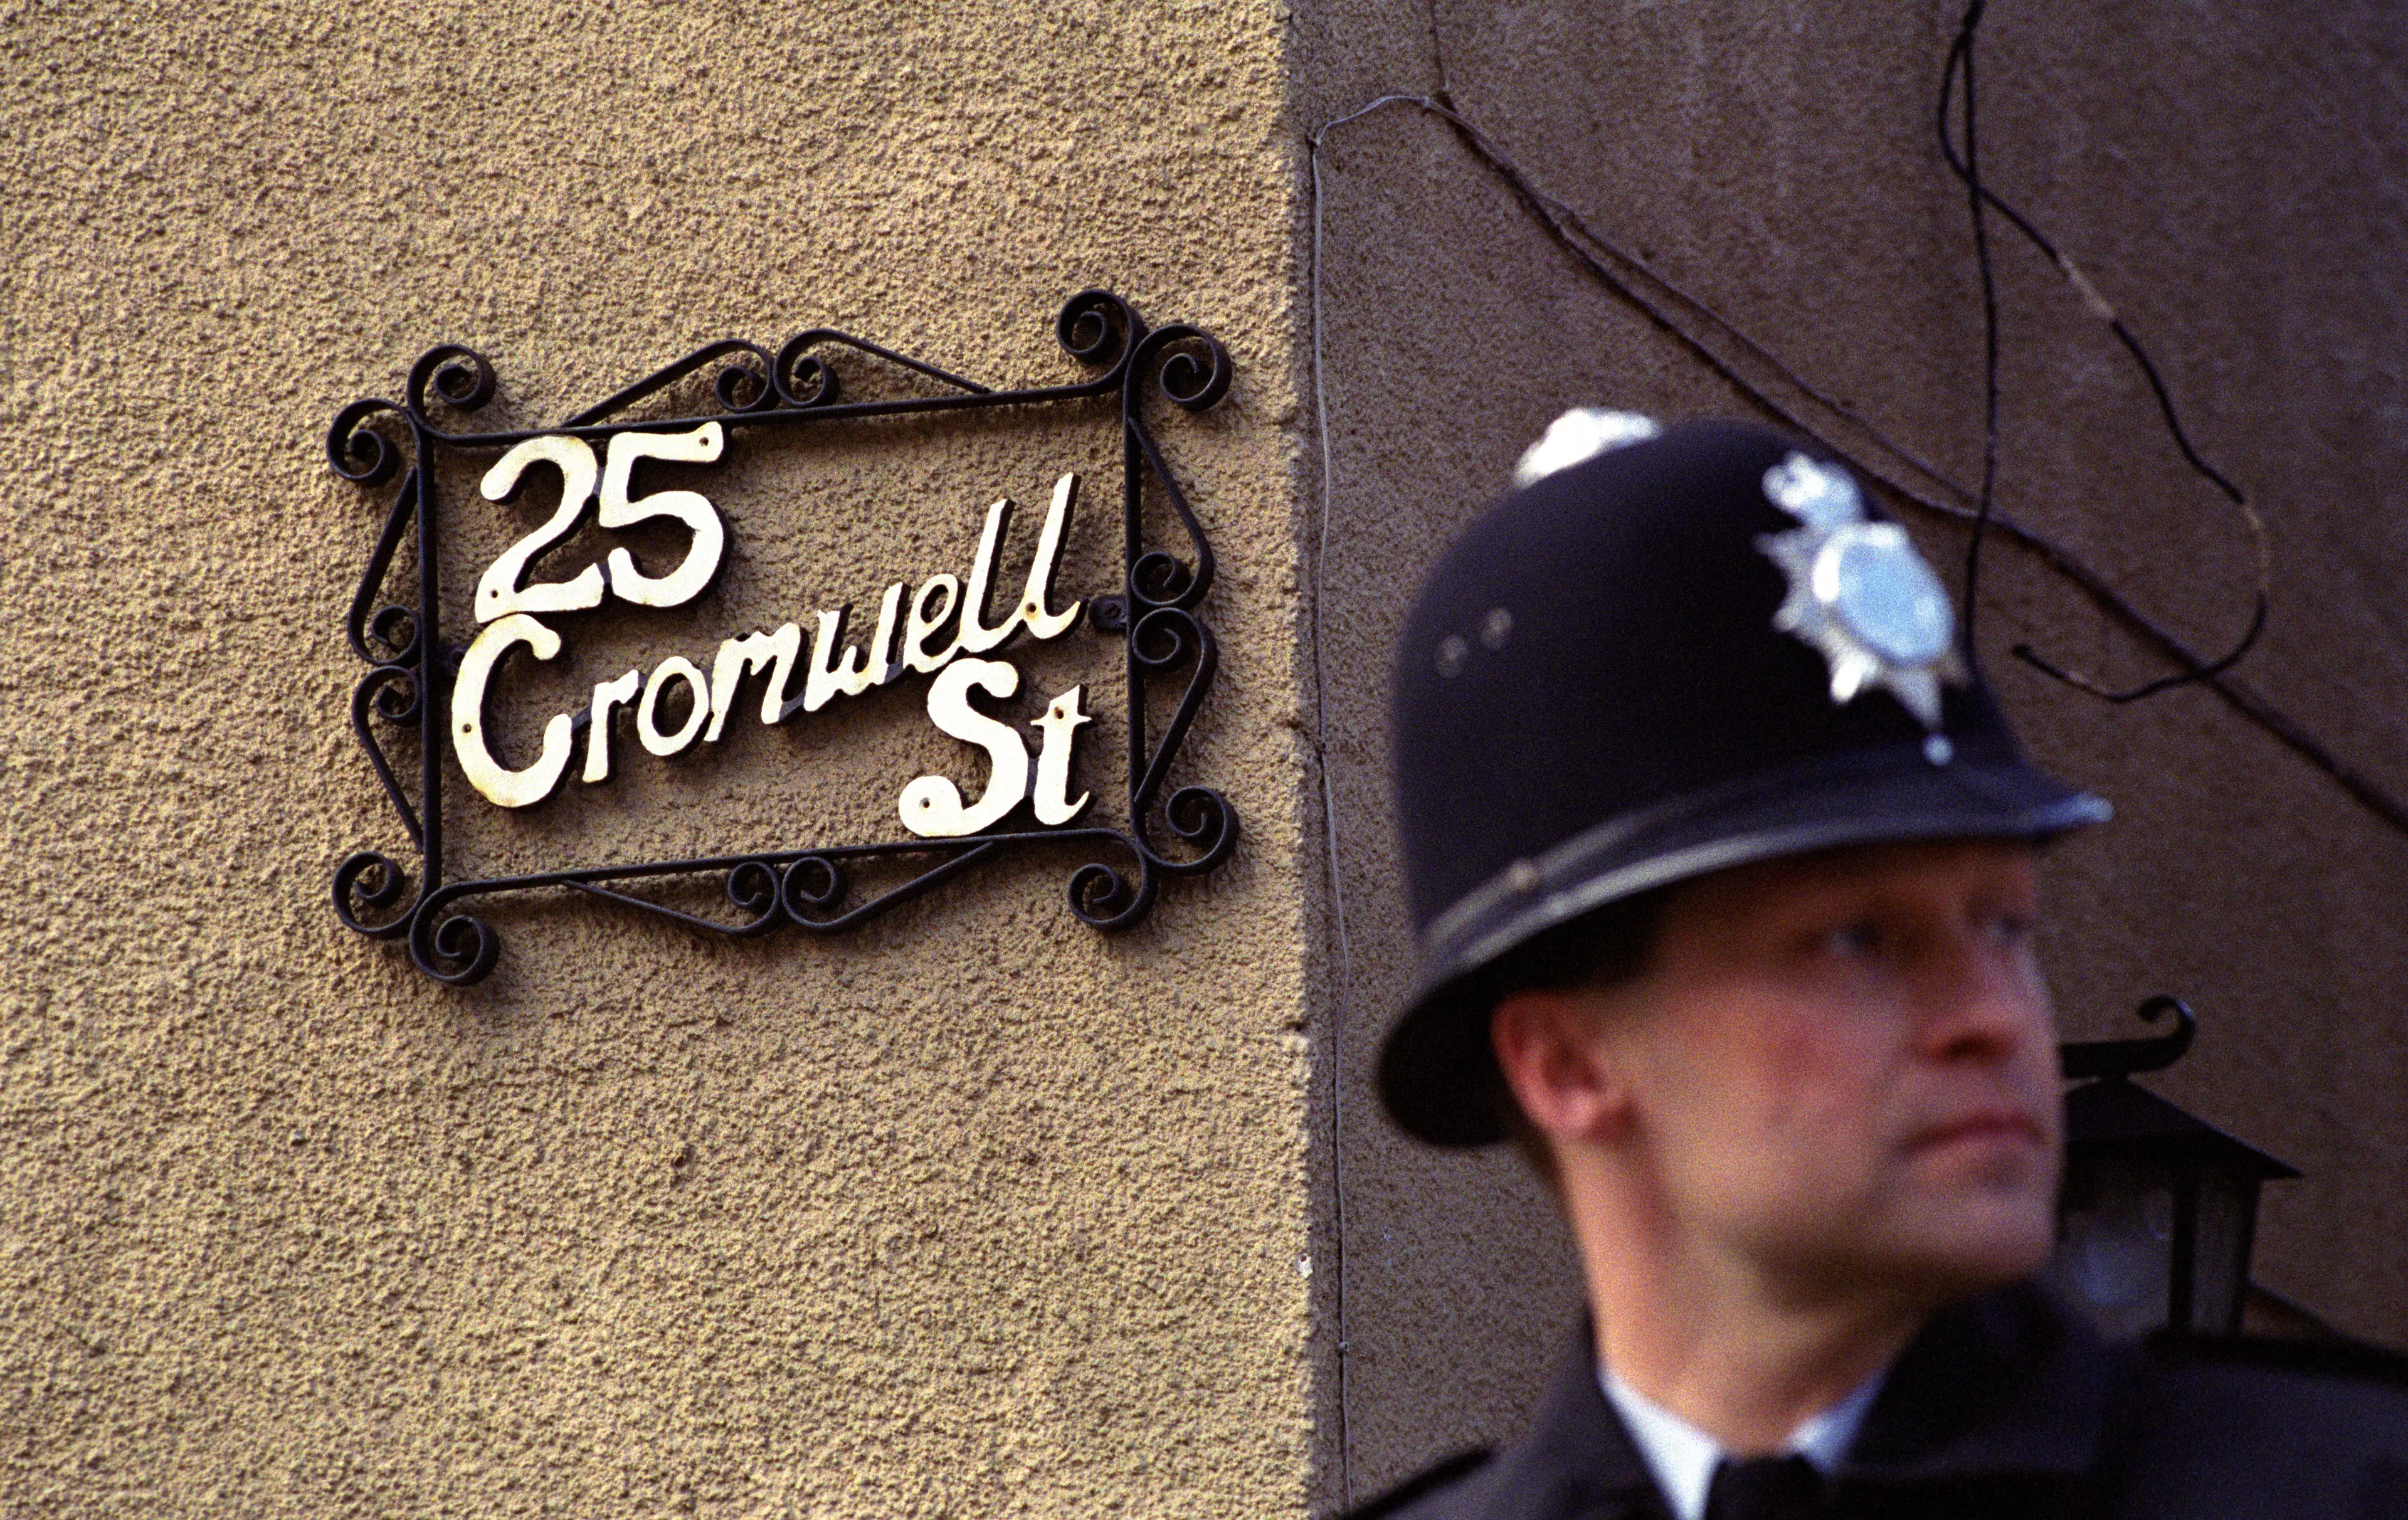 Many of the murders and much of the abuse took place at their home in Cromwell Street (